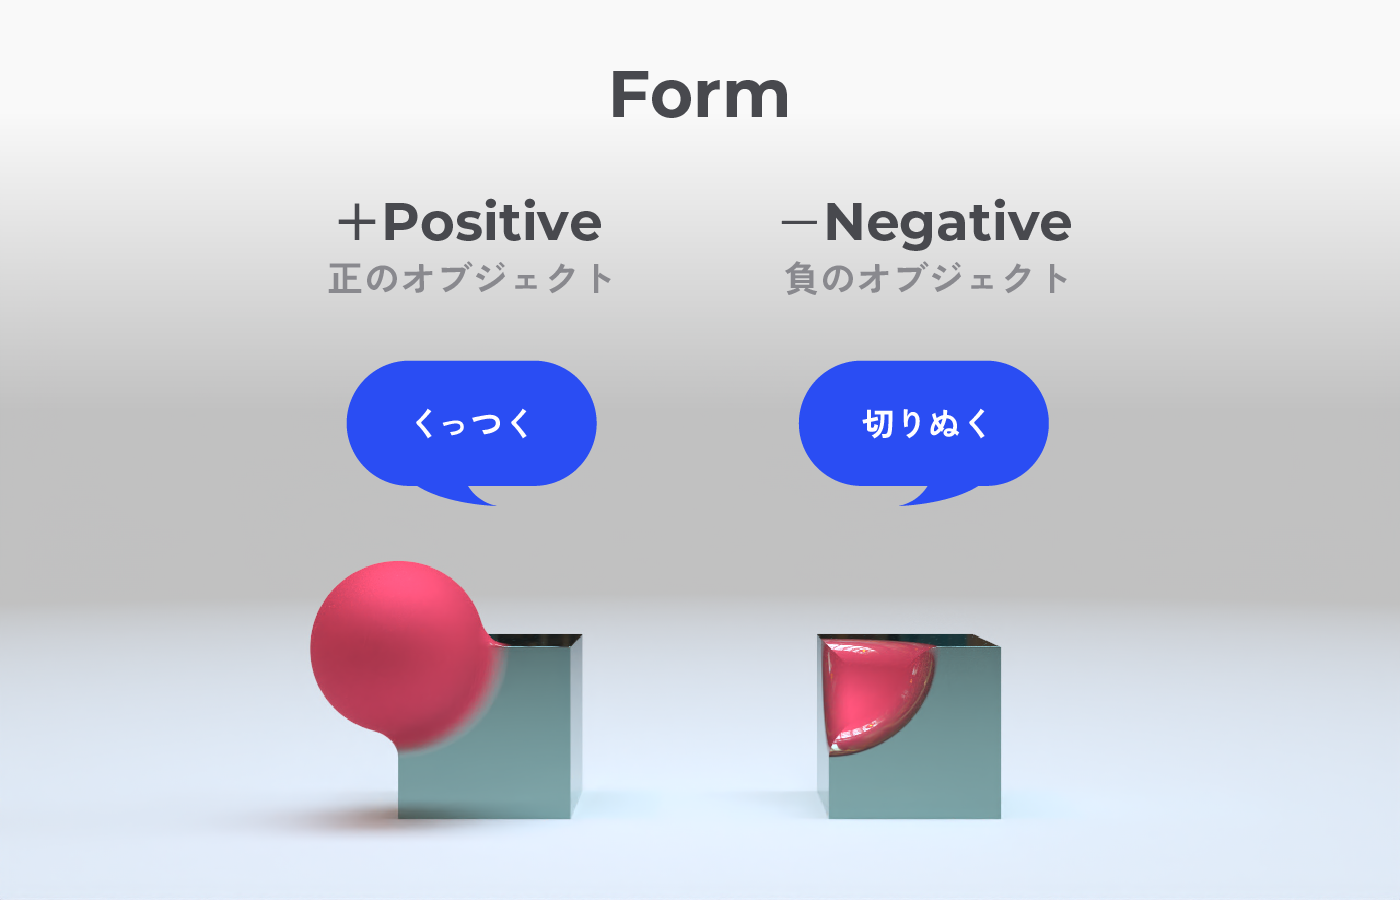 Formの説明